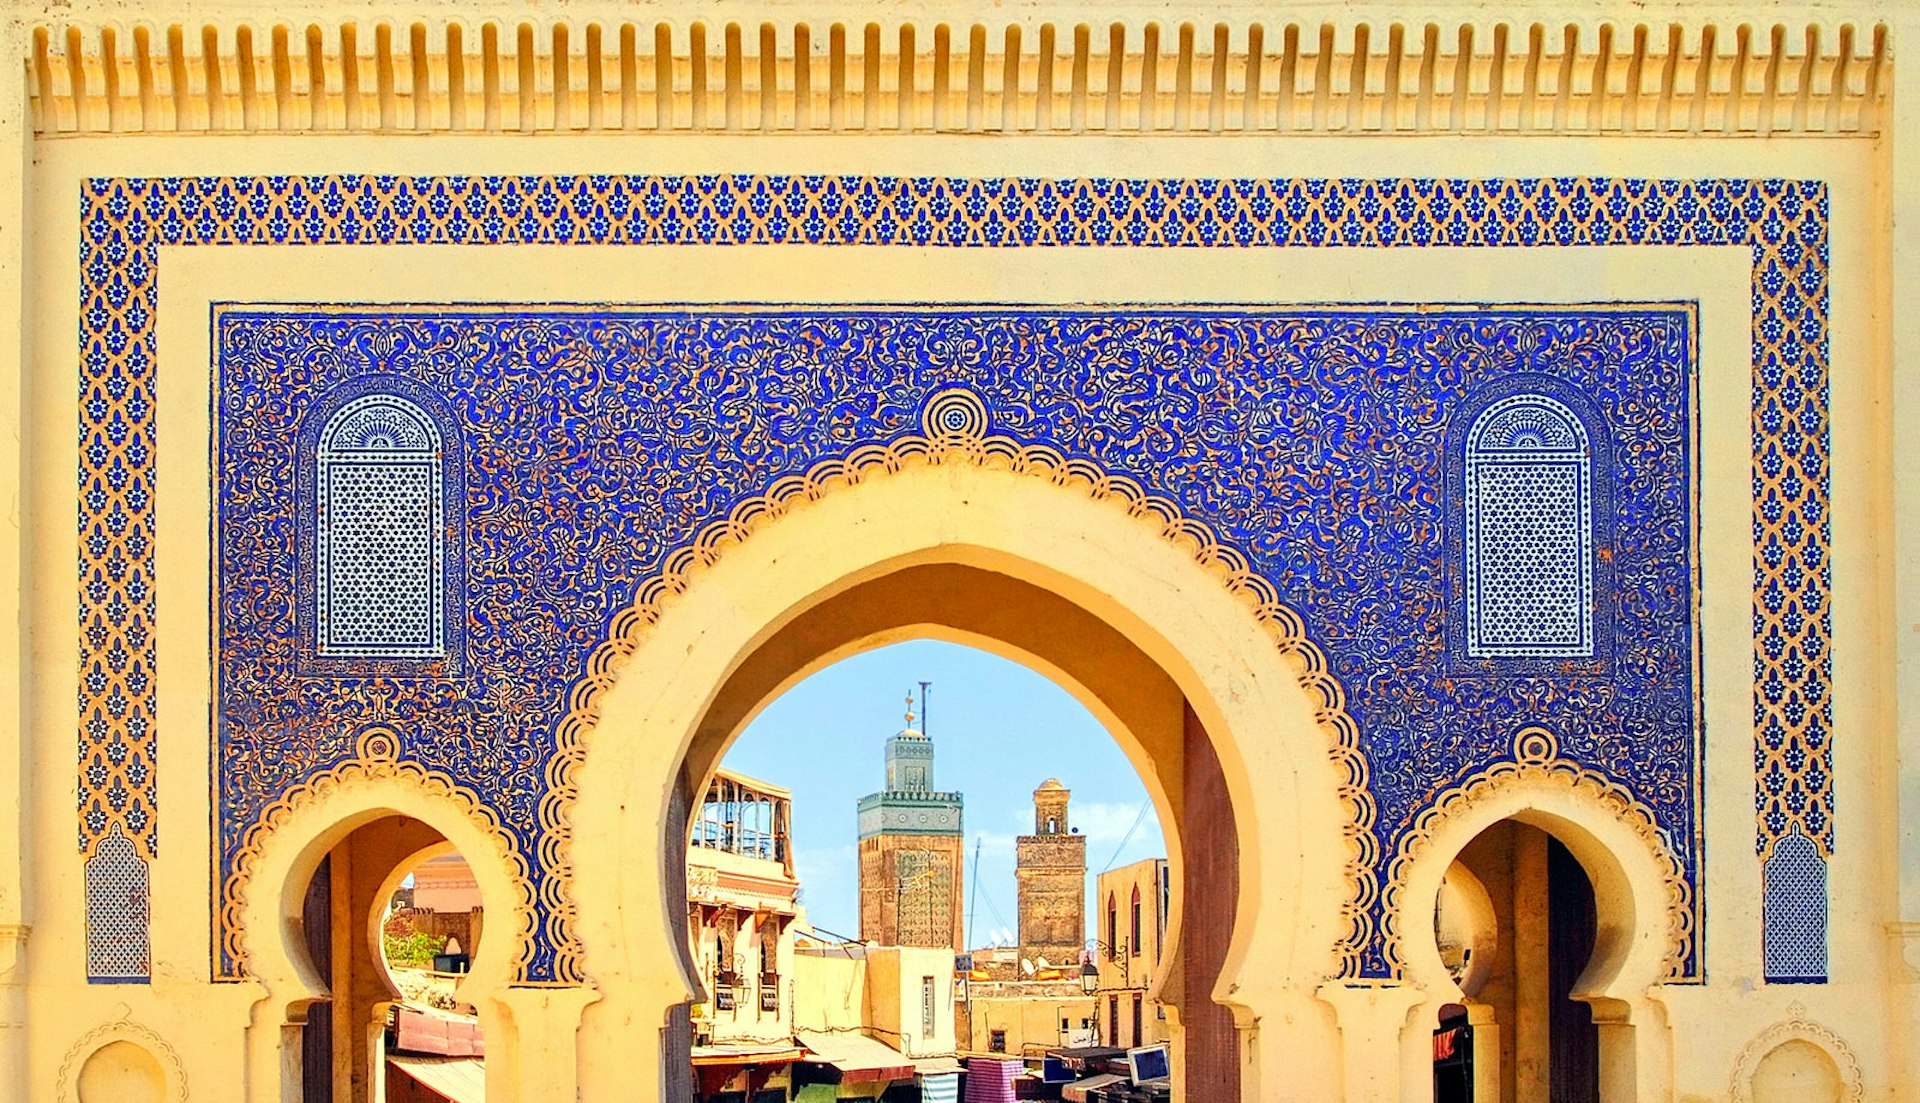 The golden arches of Fez's Blue Gate Bab Boujelud reveal life inside the medina; between the arches and gold trim, the large gate is decorated in delicate blue floral tiles. 